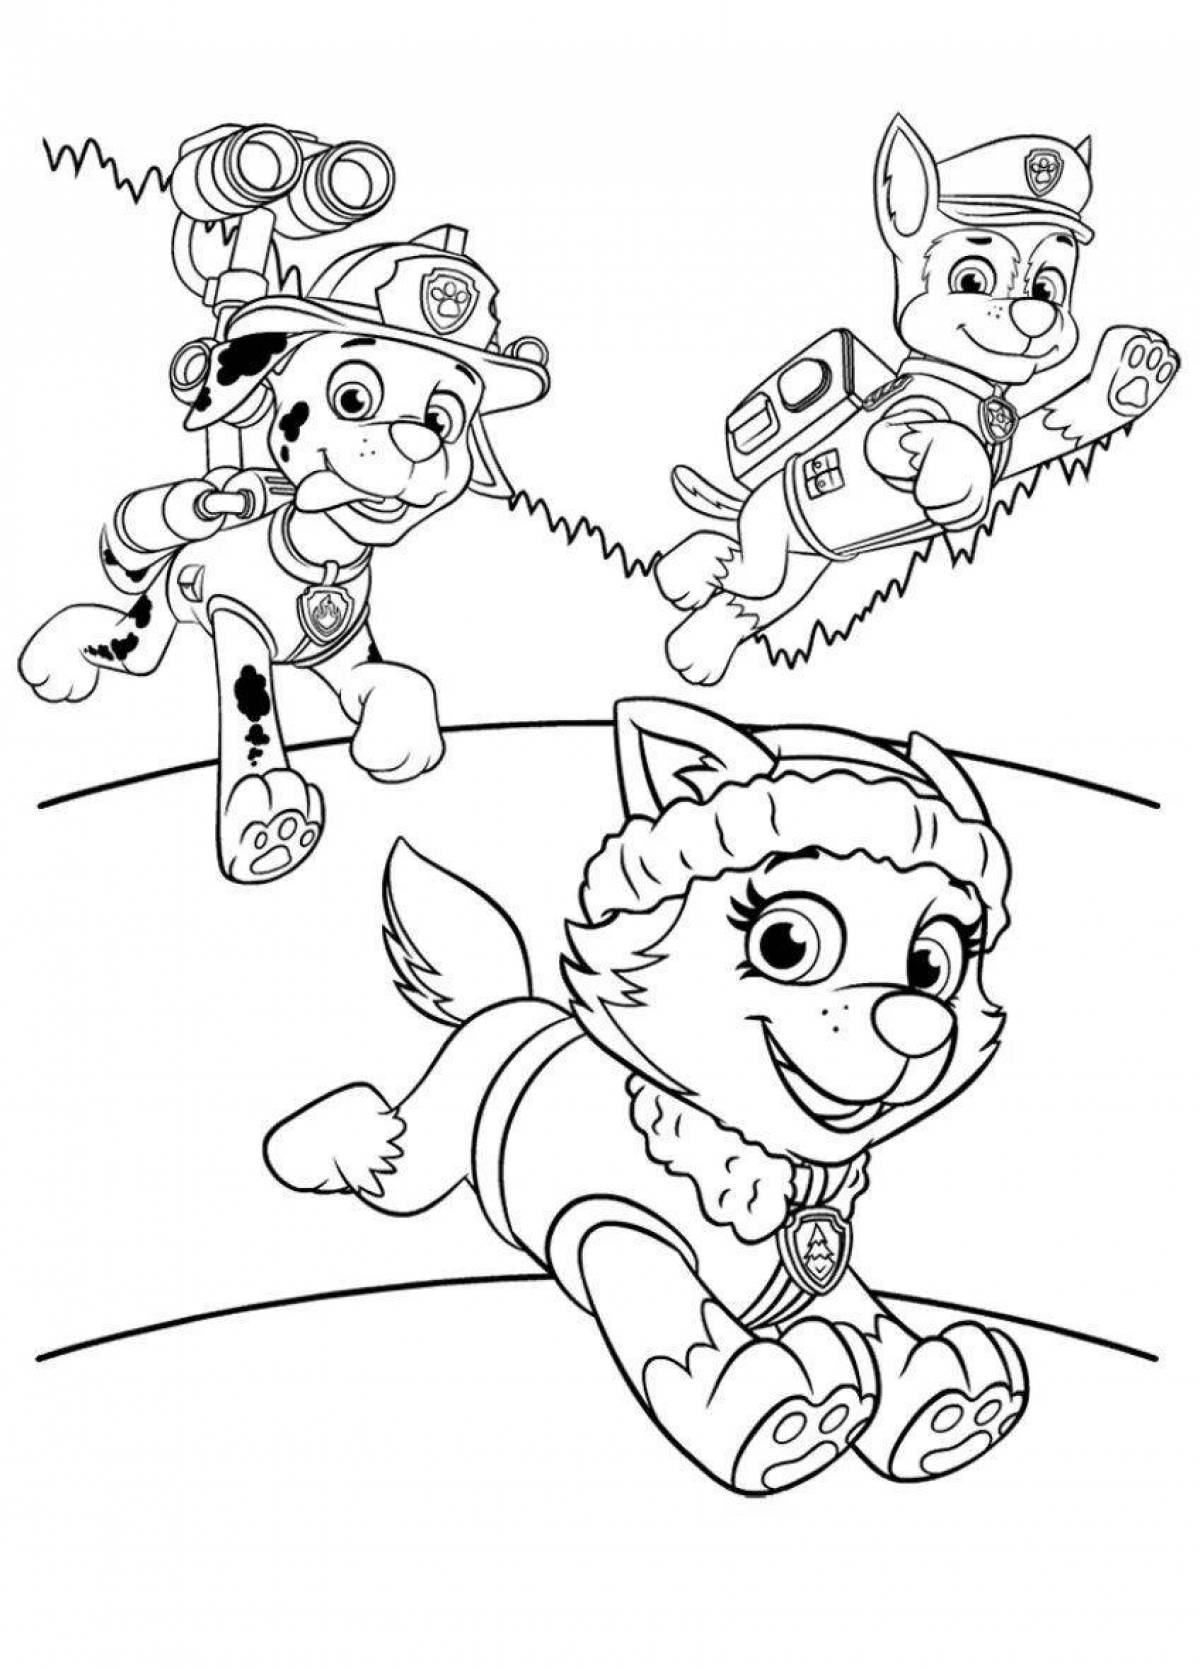 Marshal and racer fun coloring book